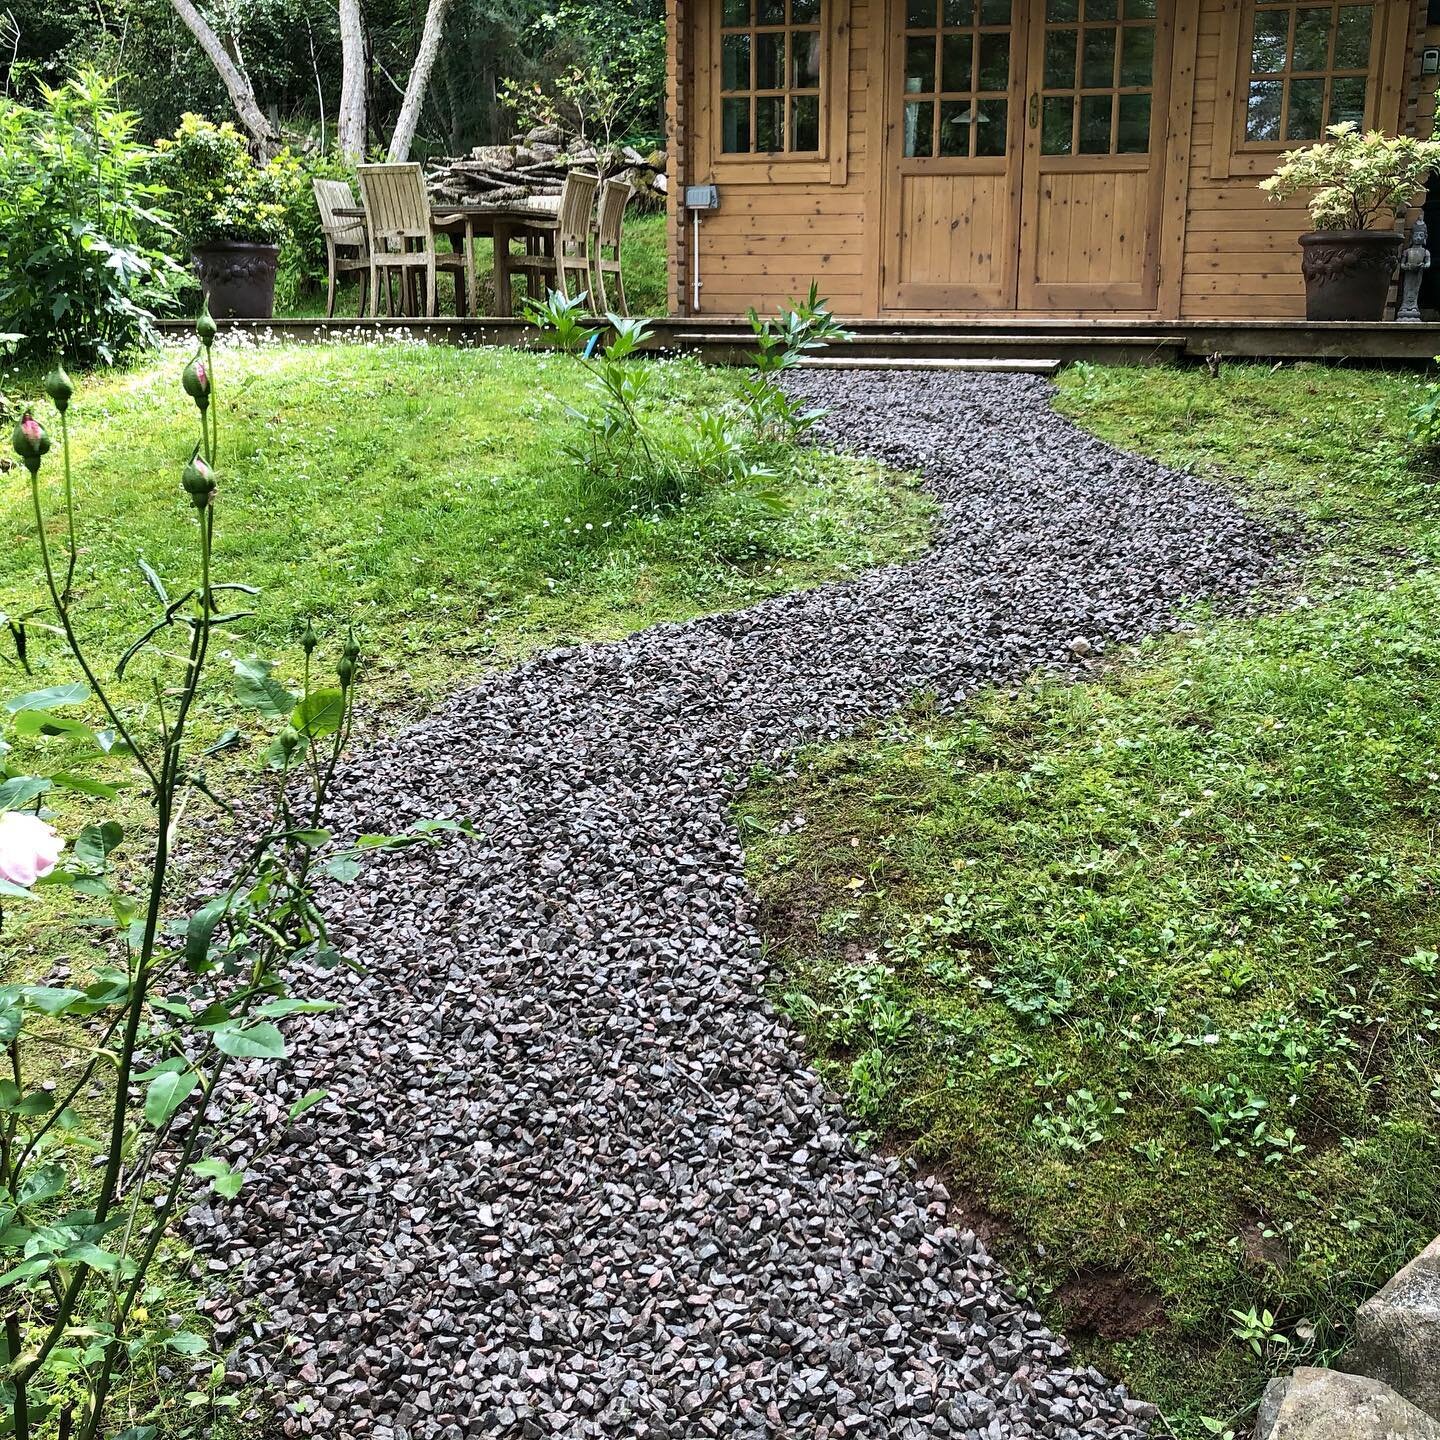 Gravel fun! Last week we moved over 20 tonne of gravel in this customers garden for some lovely new pathways around the property. 
Last picture shows what the existing gravel looked like. 

#landscaping #landscape #landscapedesign #garden #gardening 